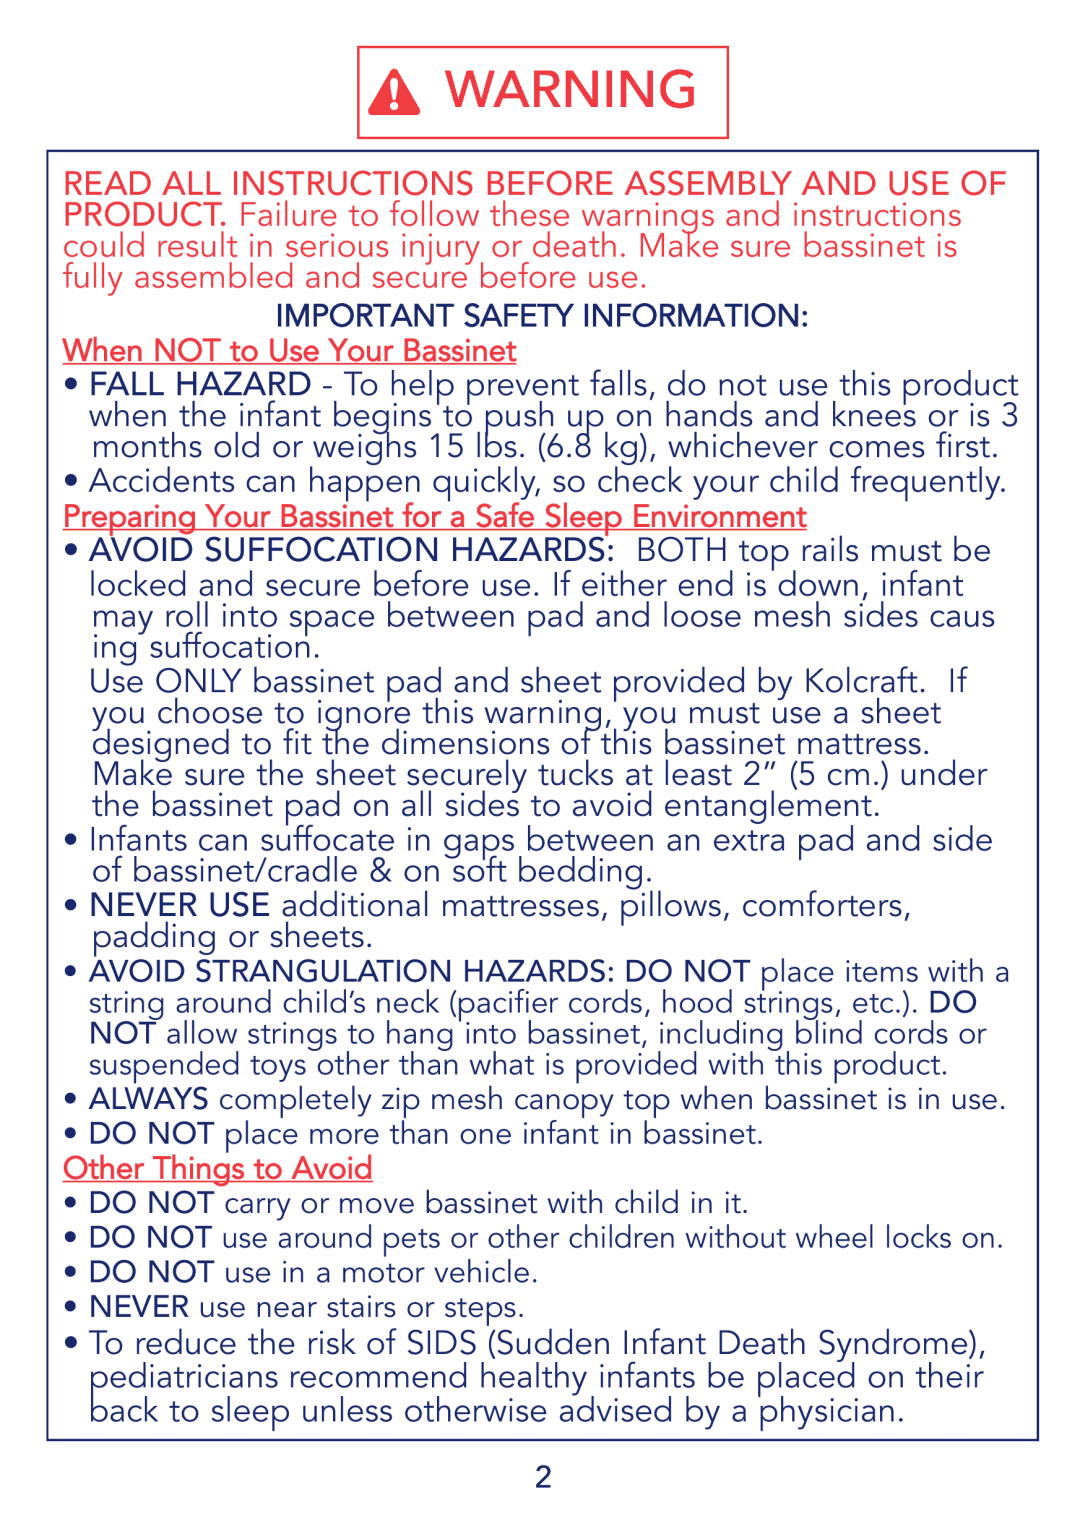 Kolcraft B14-R4 manual Accidents can happen quickly, so check your child frequently 